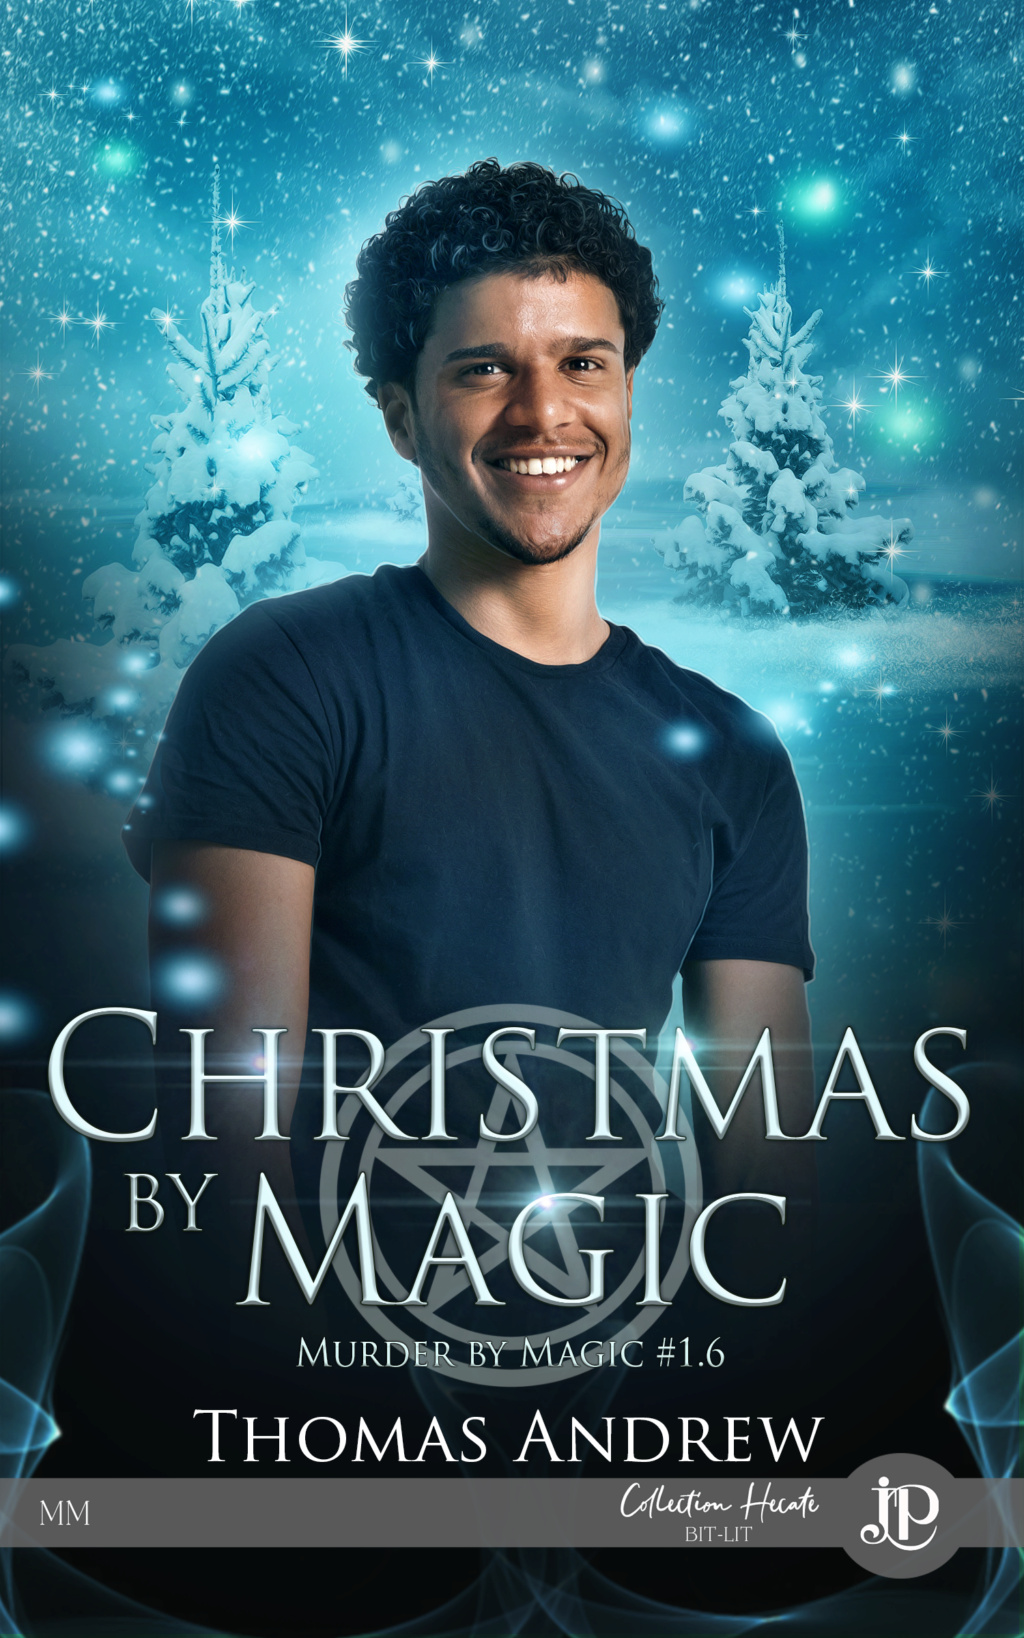 Murder by Magic  - Tome 1.6 : Christmas by Magic de Thomas Andrew Murder11